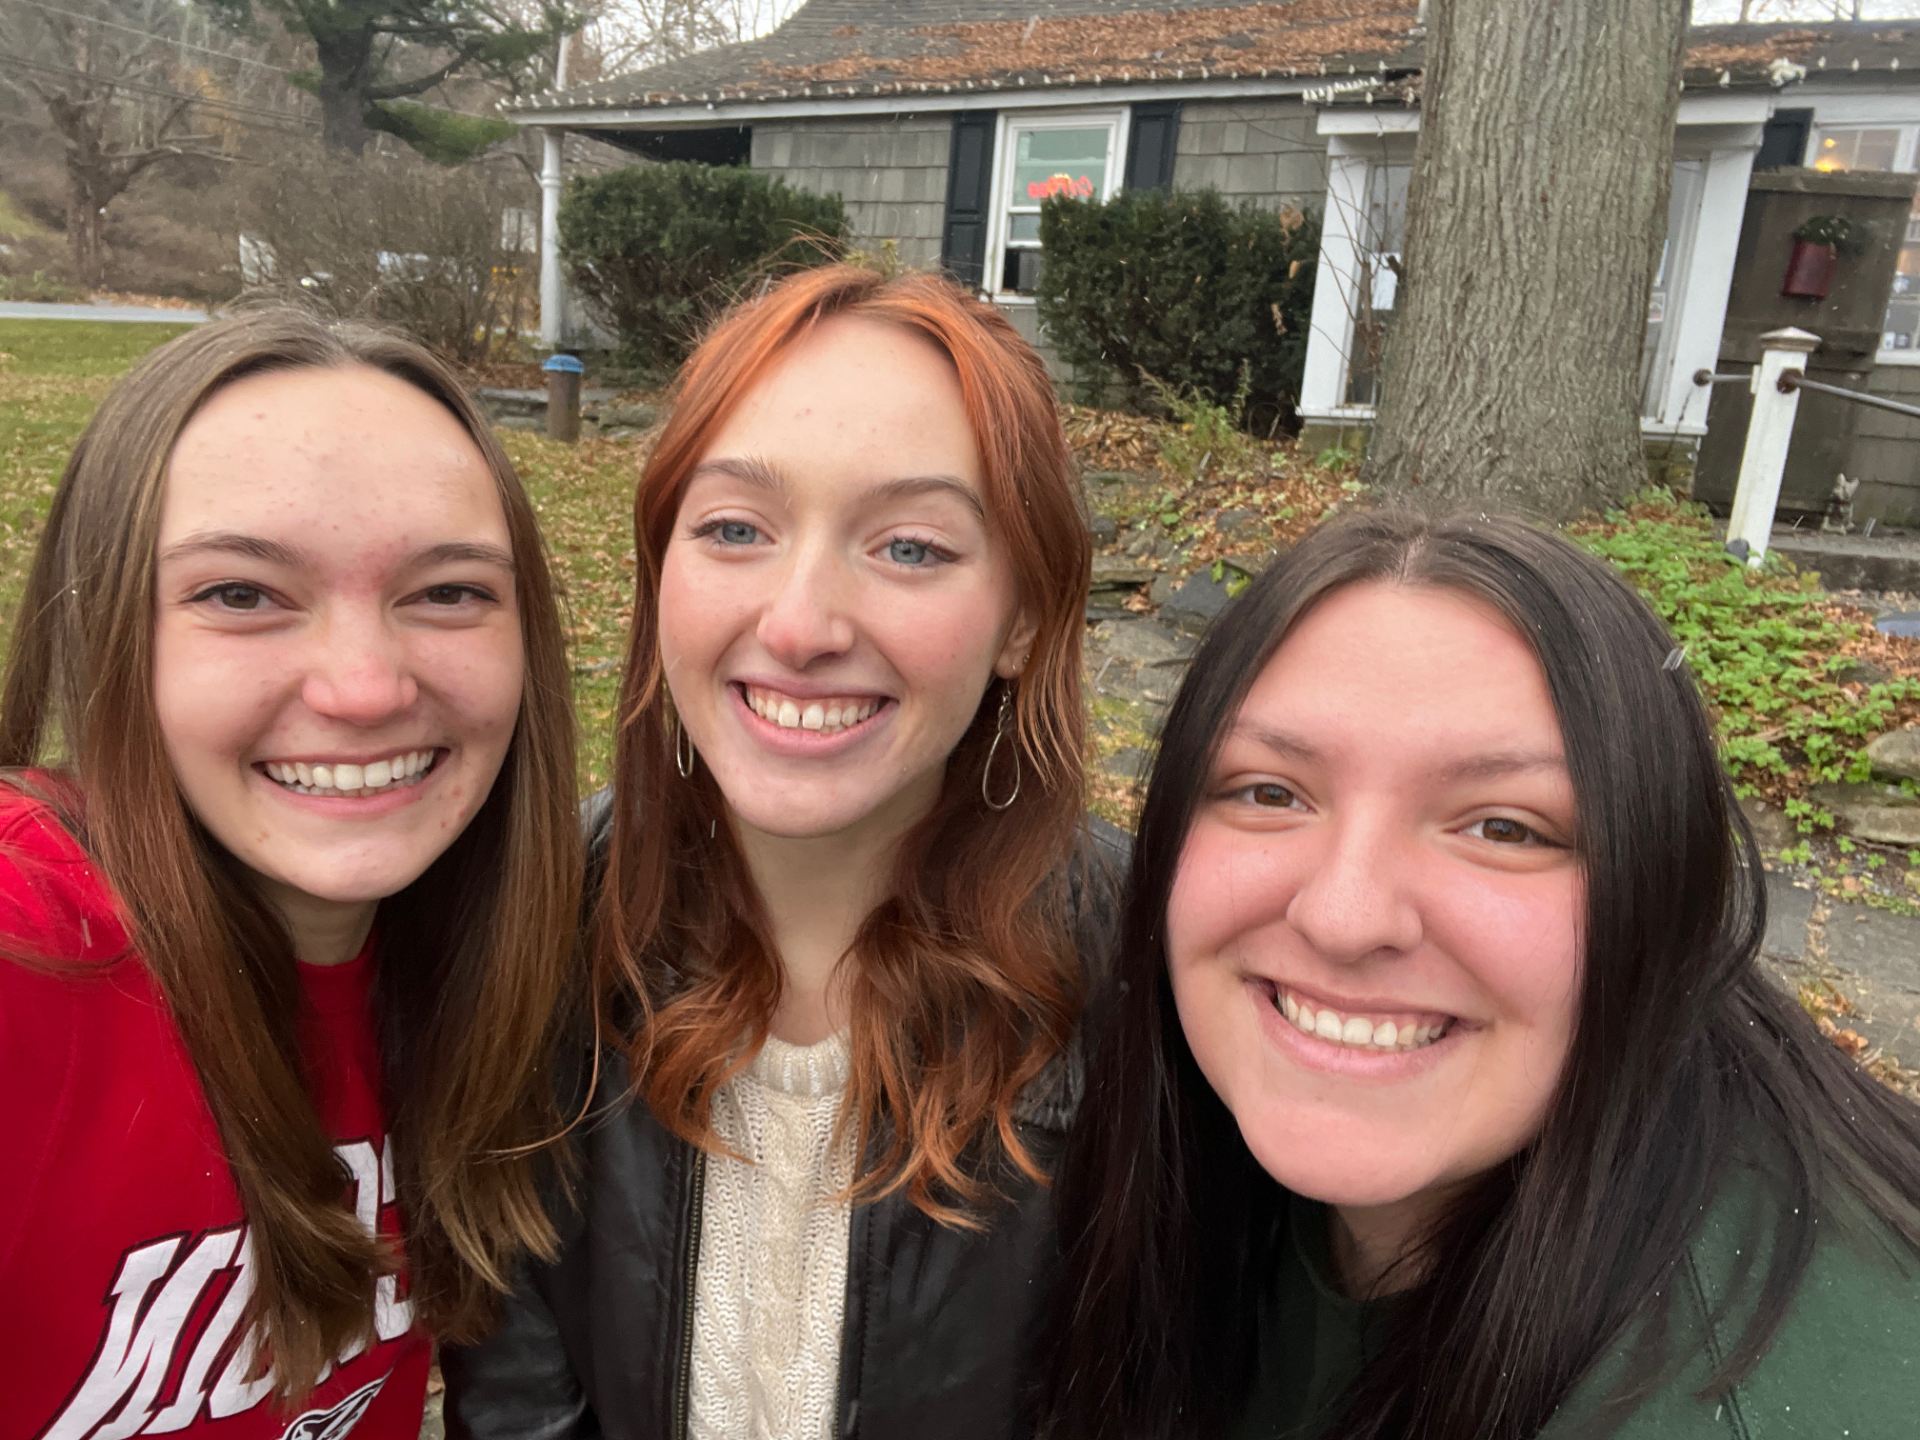 DePaul Student smiling in photo with two hometown friends over spring break